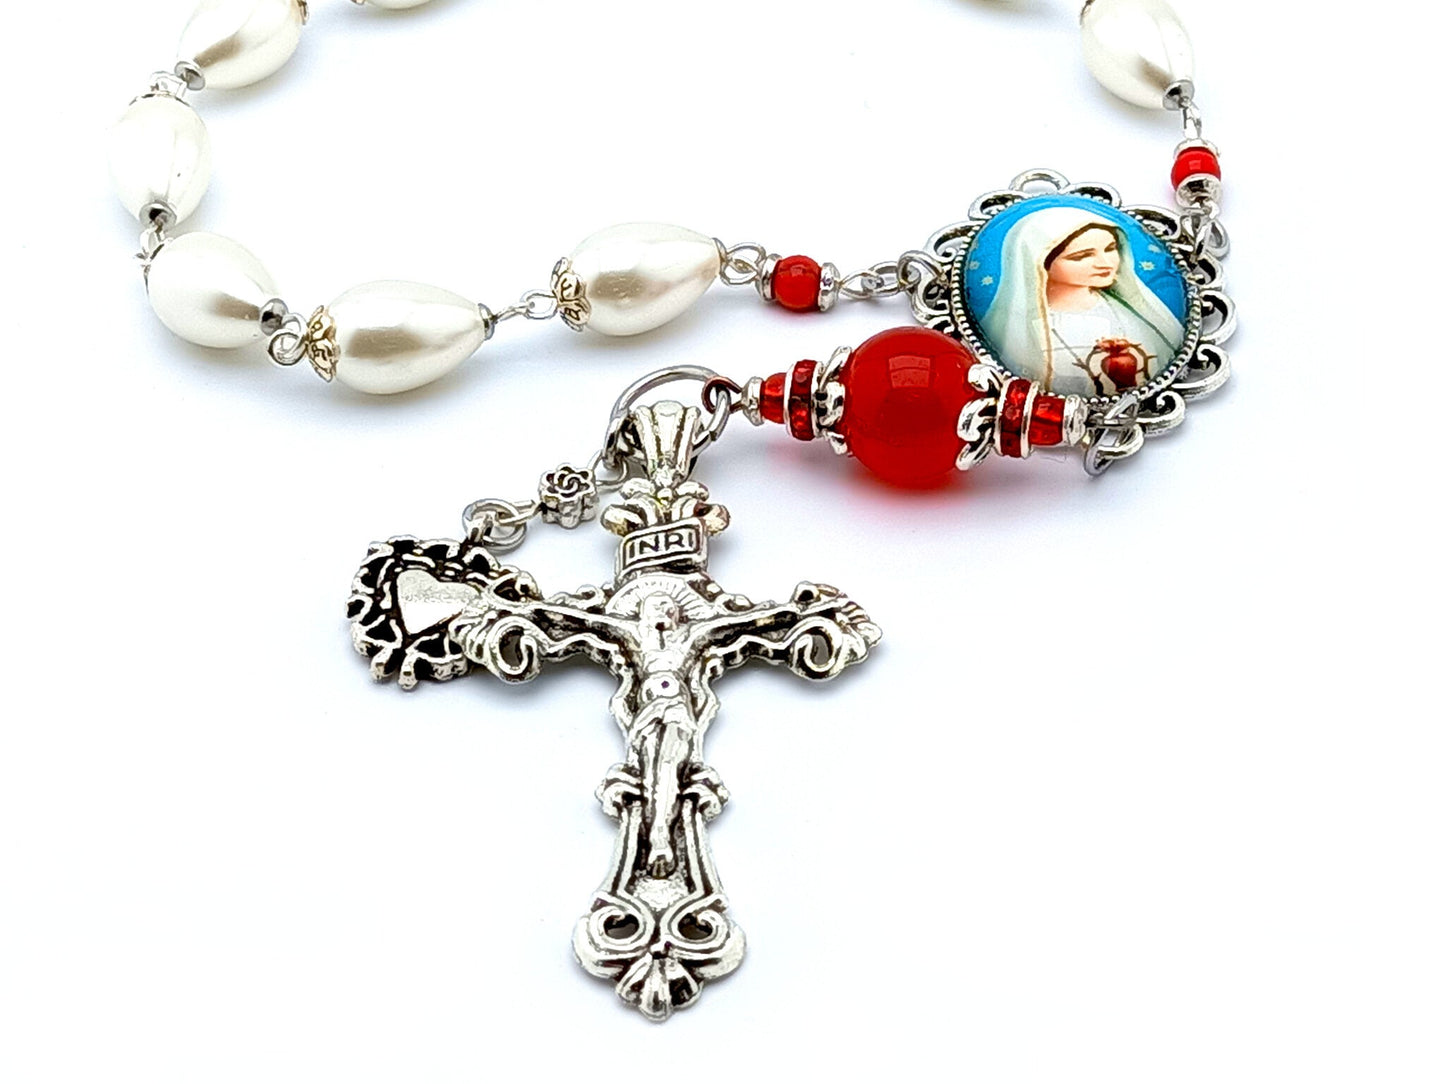 Immaculate Heart of Mary unique rosary beads single decade rosary with pearl and ruby gemstone beads, silver crucifix and picture centre medal.